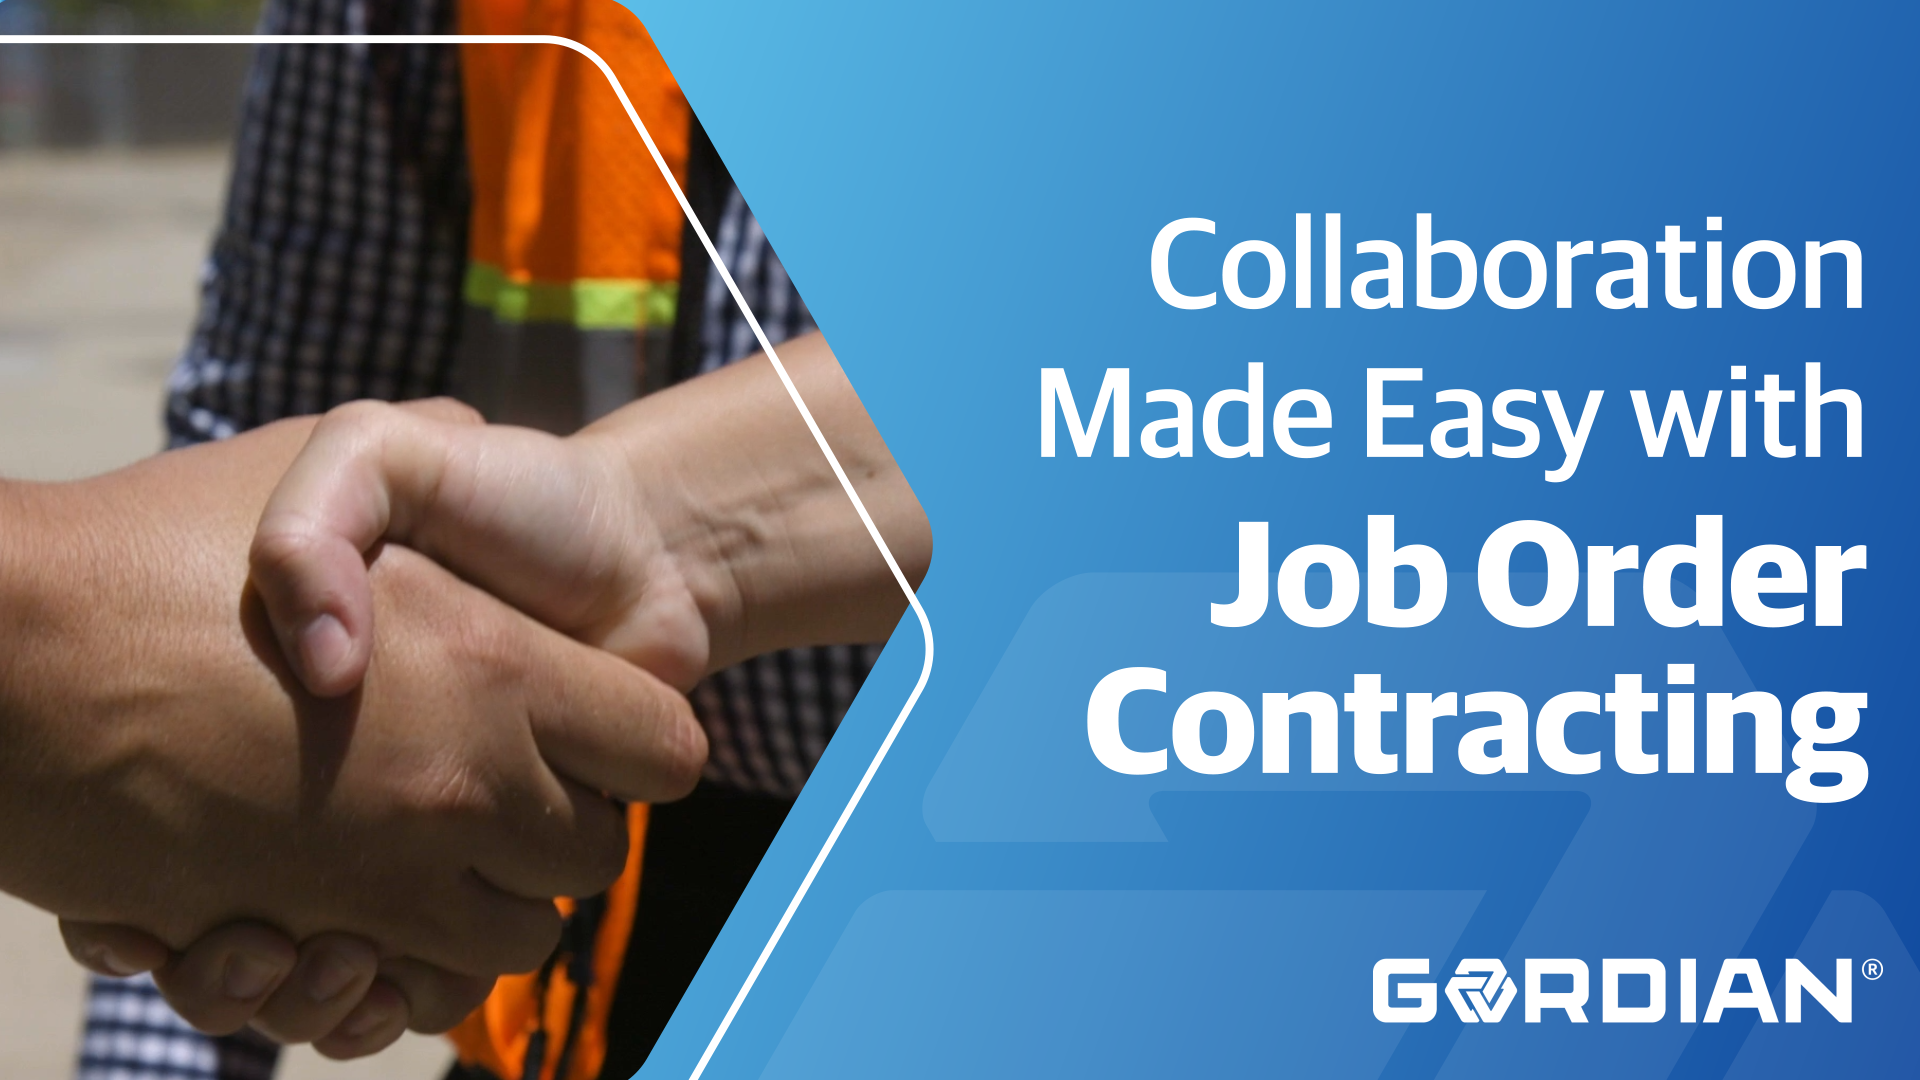 Job Order Contracting: Collaboration Made Easy